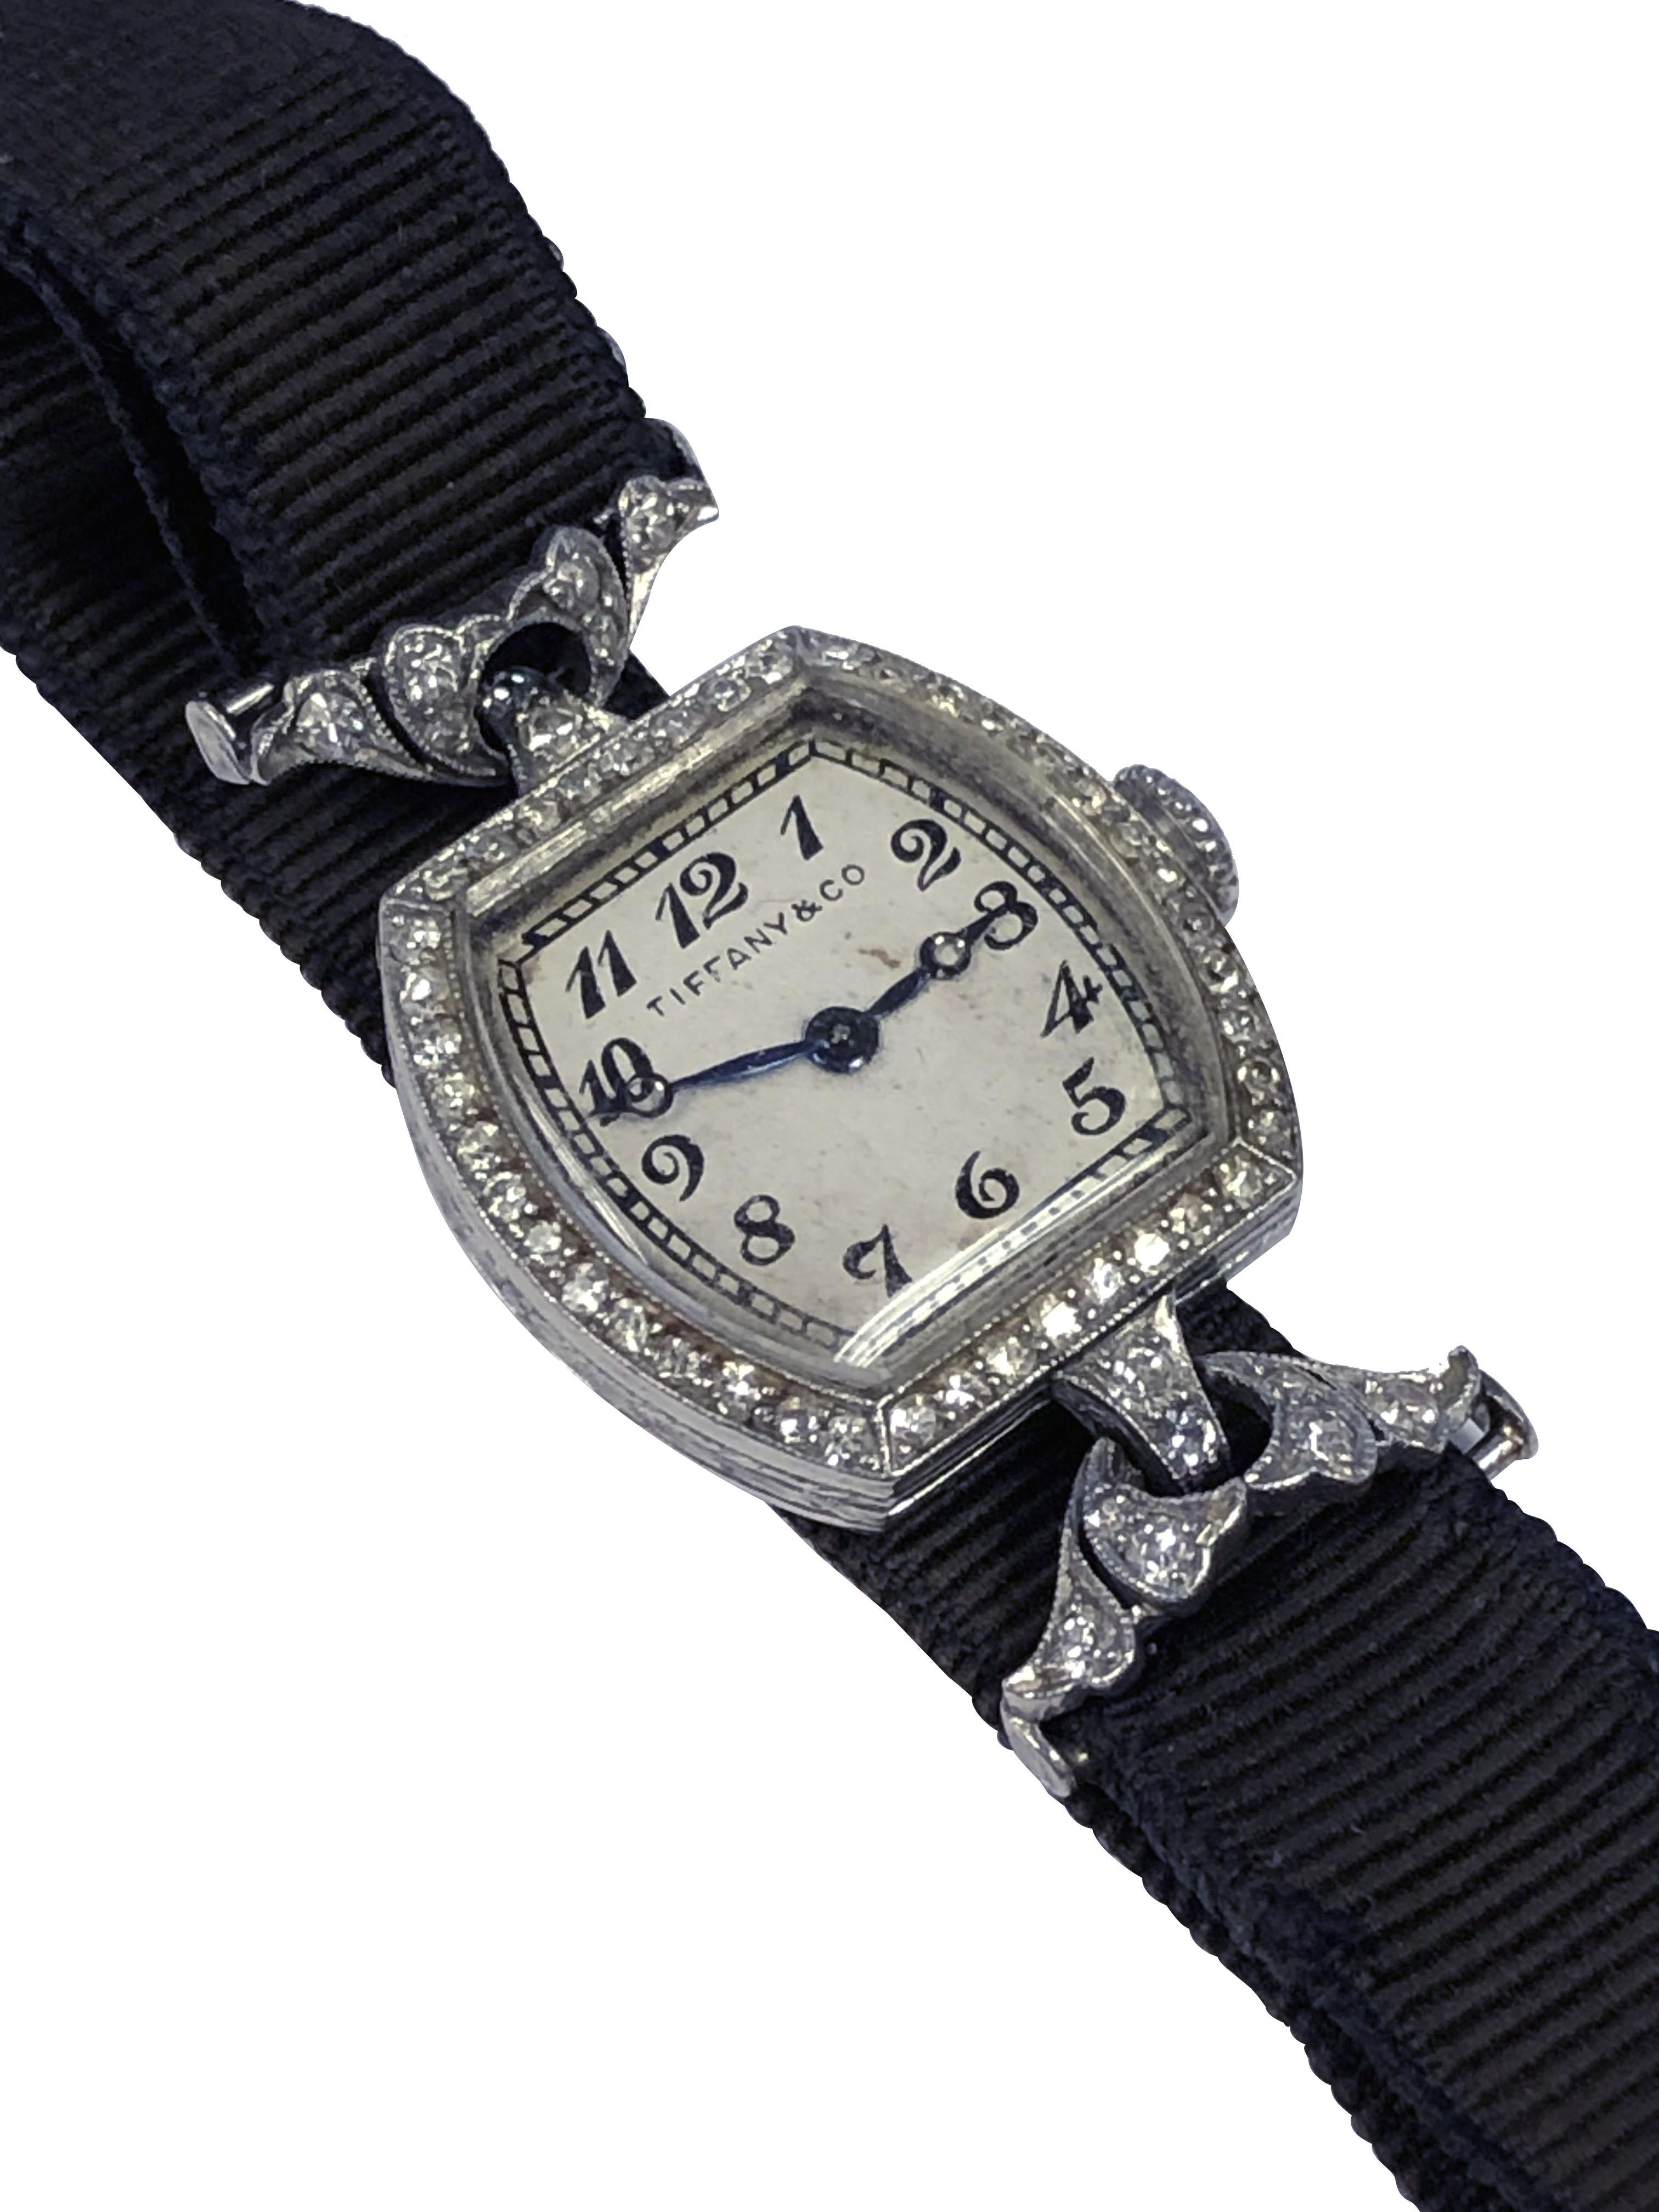 Circa 1920s Tiffany & Company retailed Platinum and Diamond Ladies Wrist Watch, 18 x 18 M.M. Cushion shape case with Hand Engraving work and single cut Diamonds set into the bezel. Flexible Diamond set lugs, the watch with the lugs measures 1 1/4